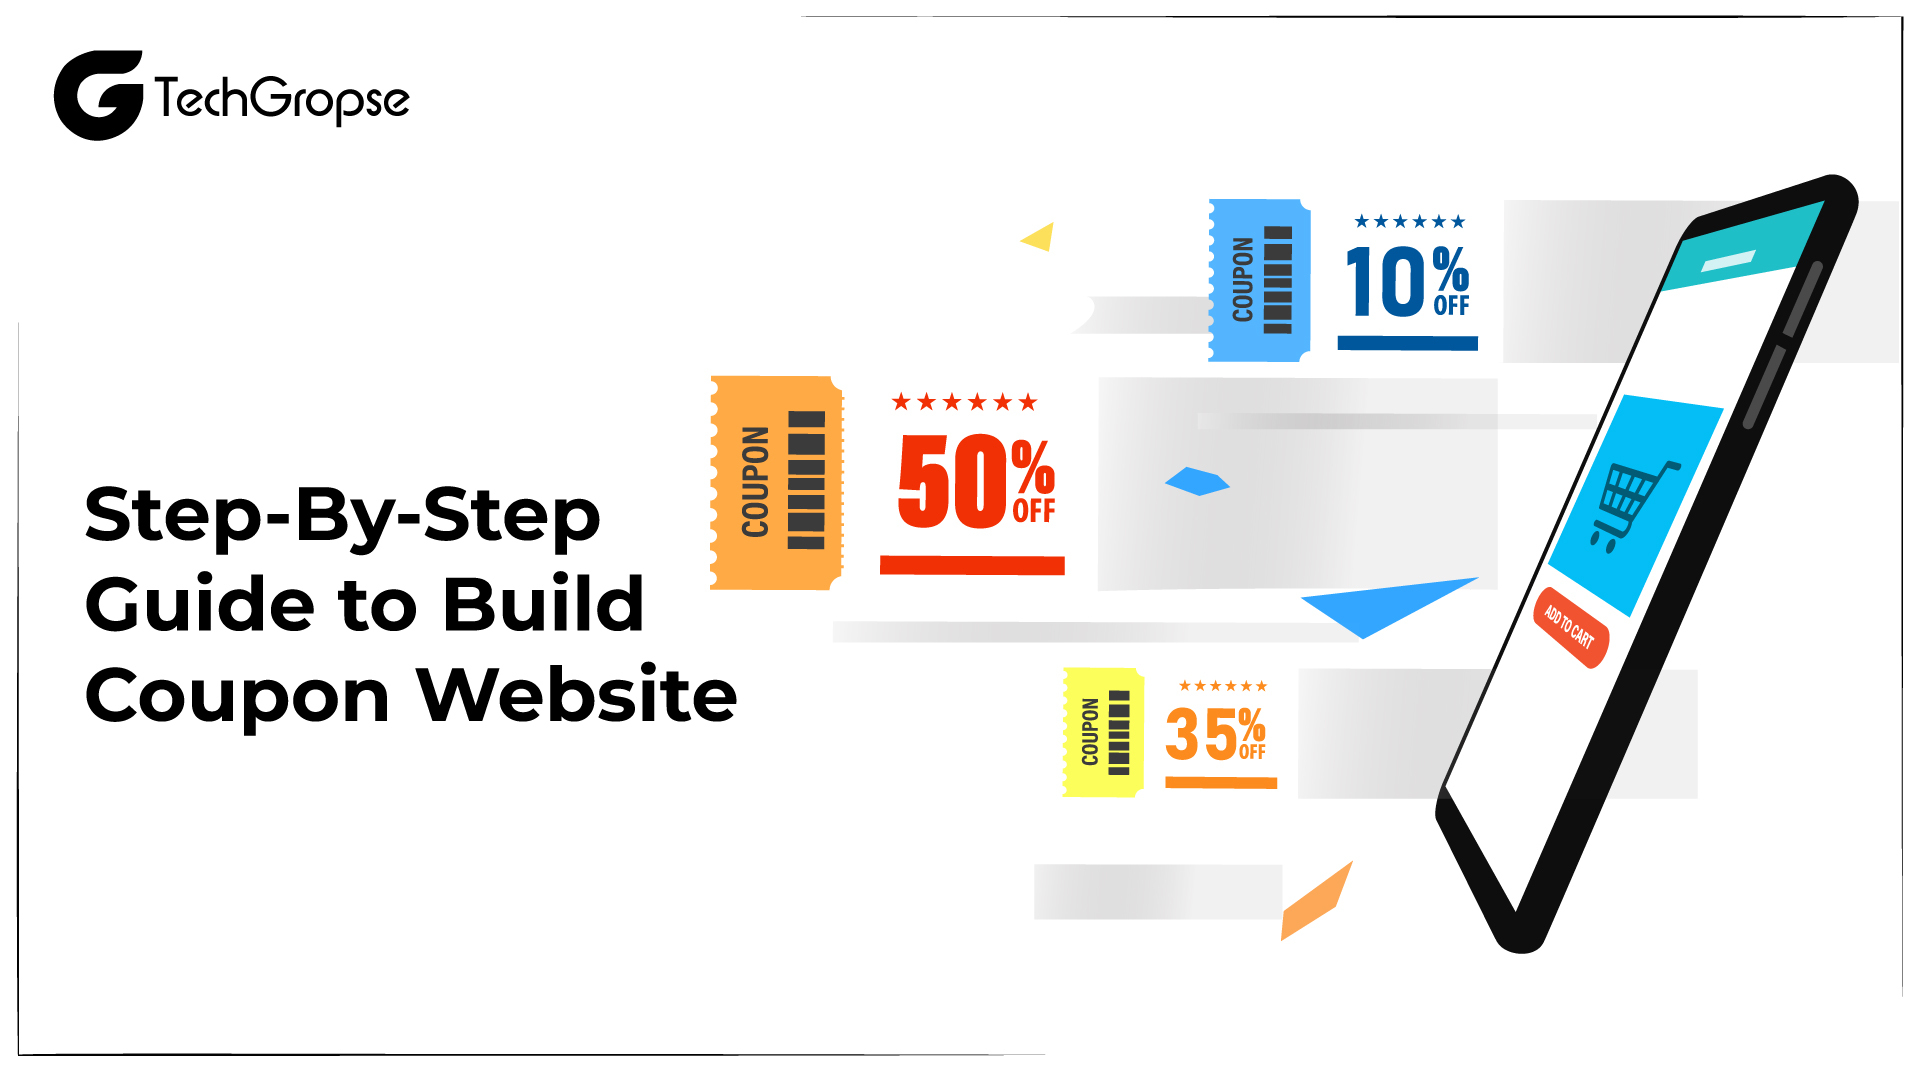 Step-By-Step Guide to Build Coupon Website 